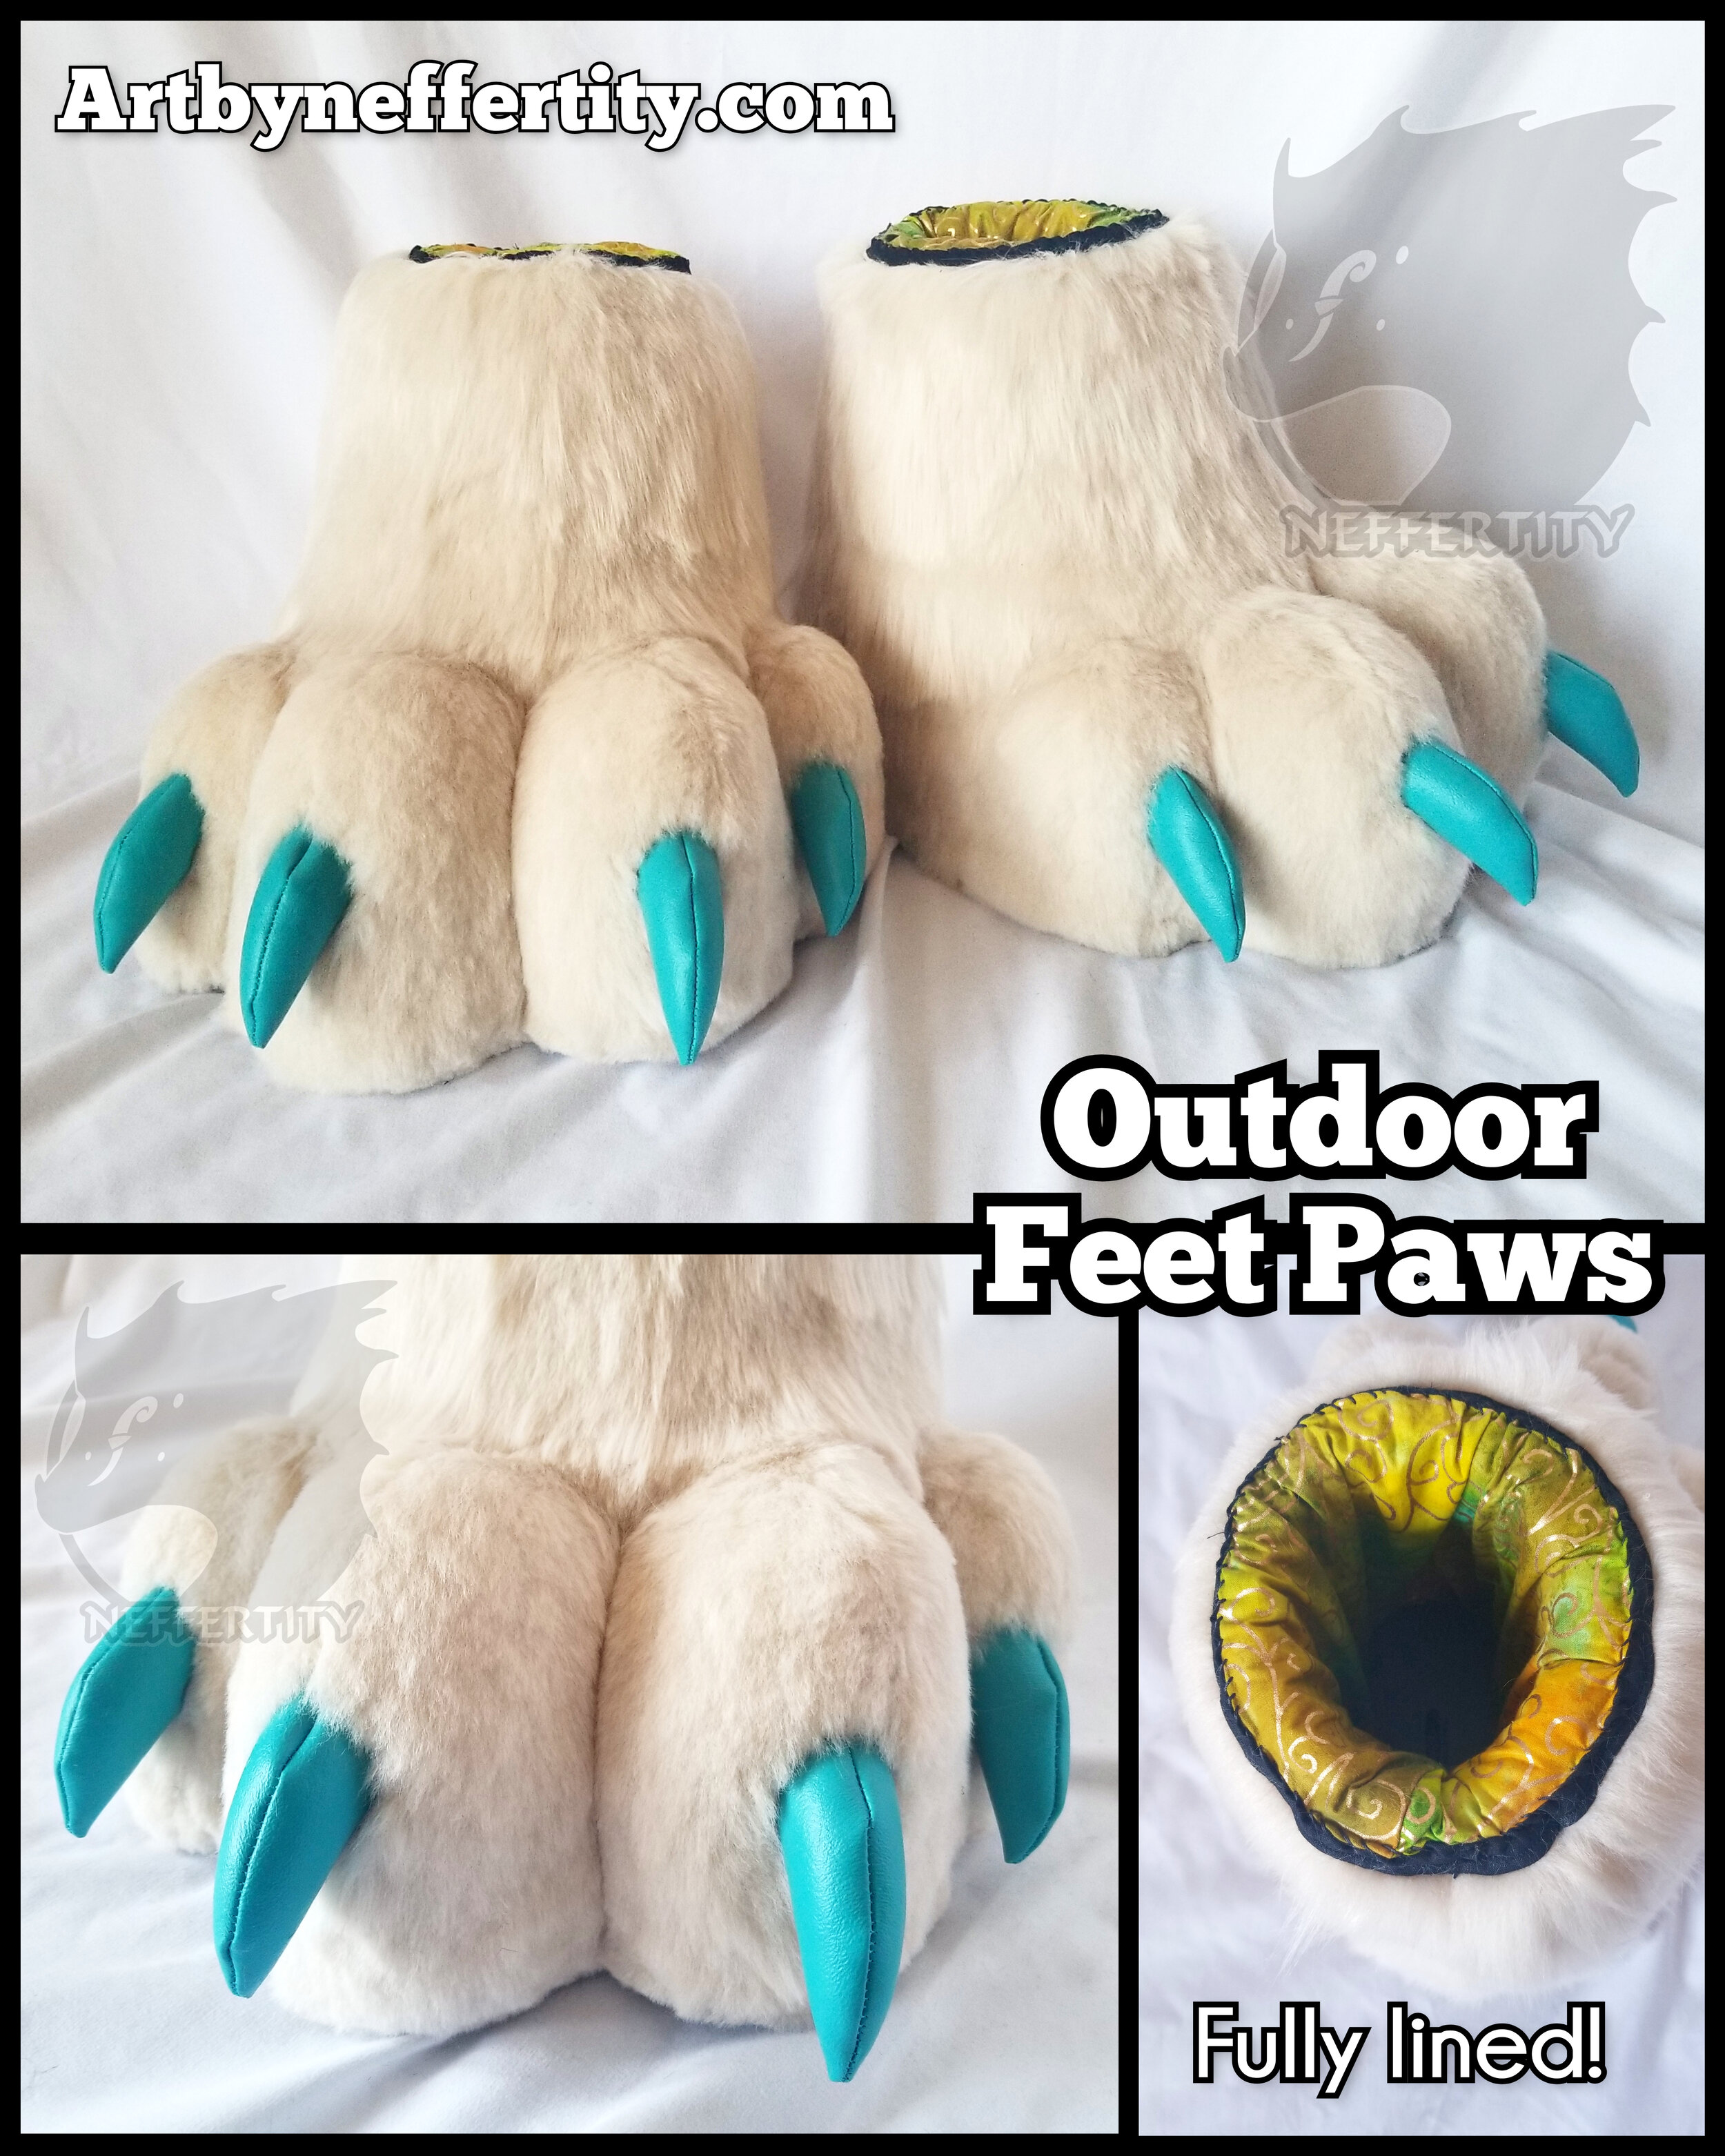 Outdoor Paws.jpg